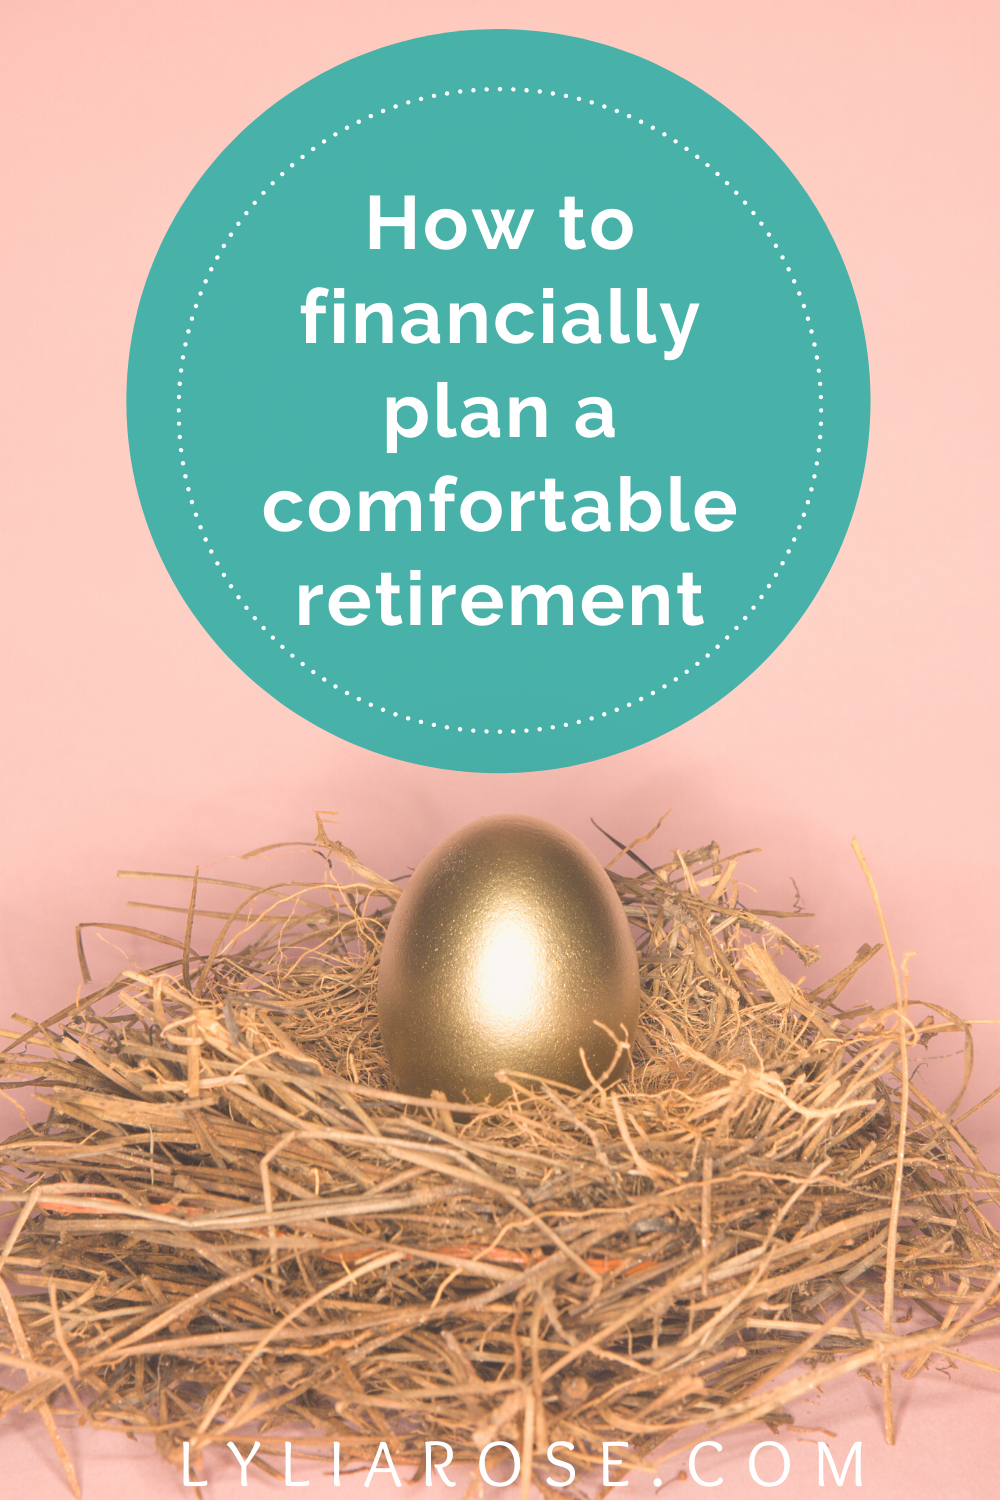 How to financially plan a comfortable retirement